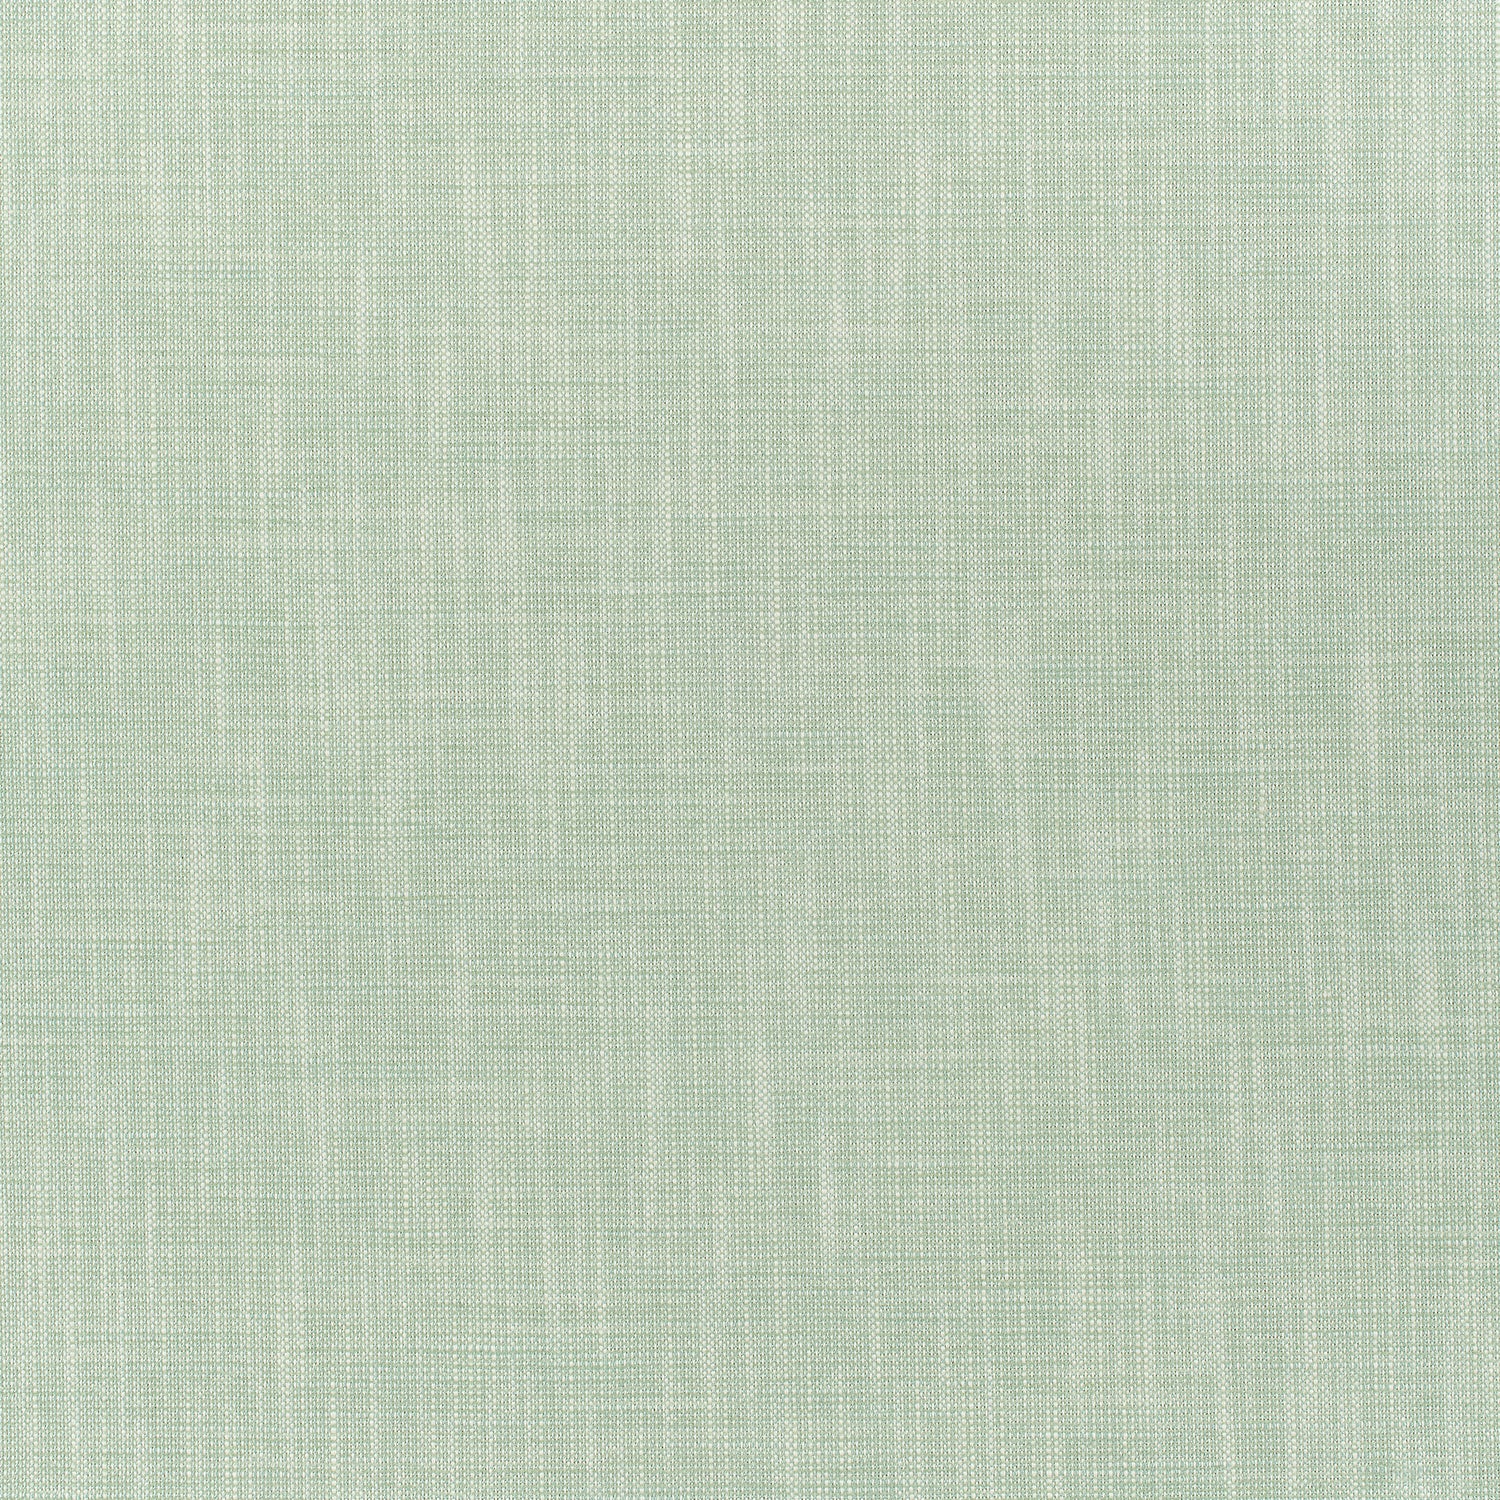 Bailey fabric in seafoam color - pattern number W80493 - by Thibaut in the Mosaic collection